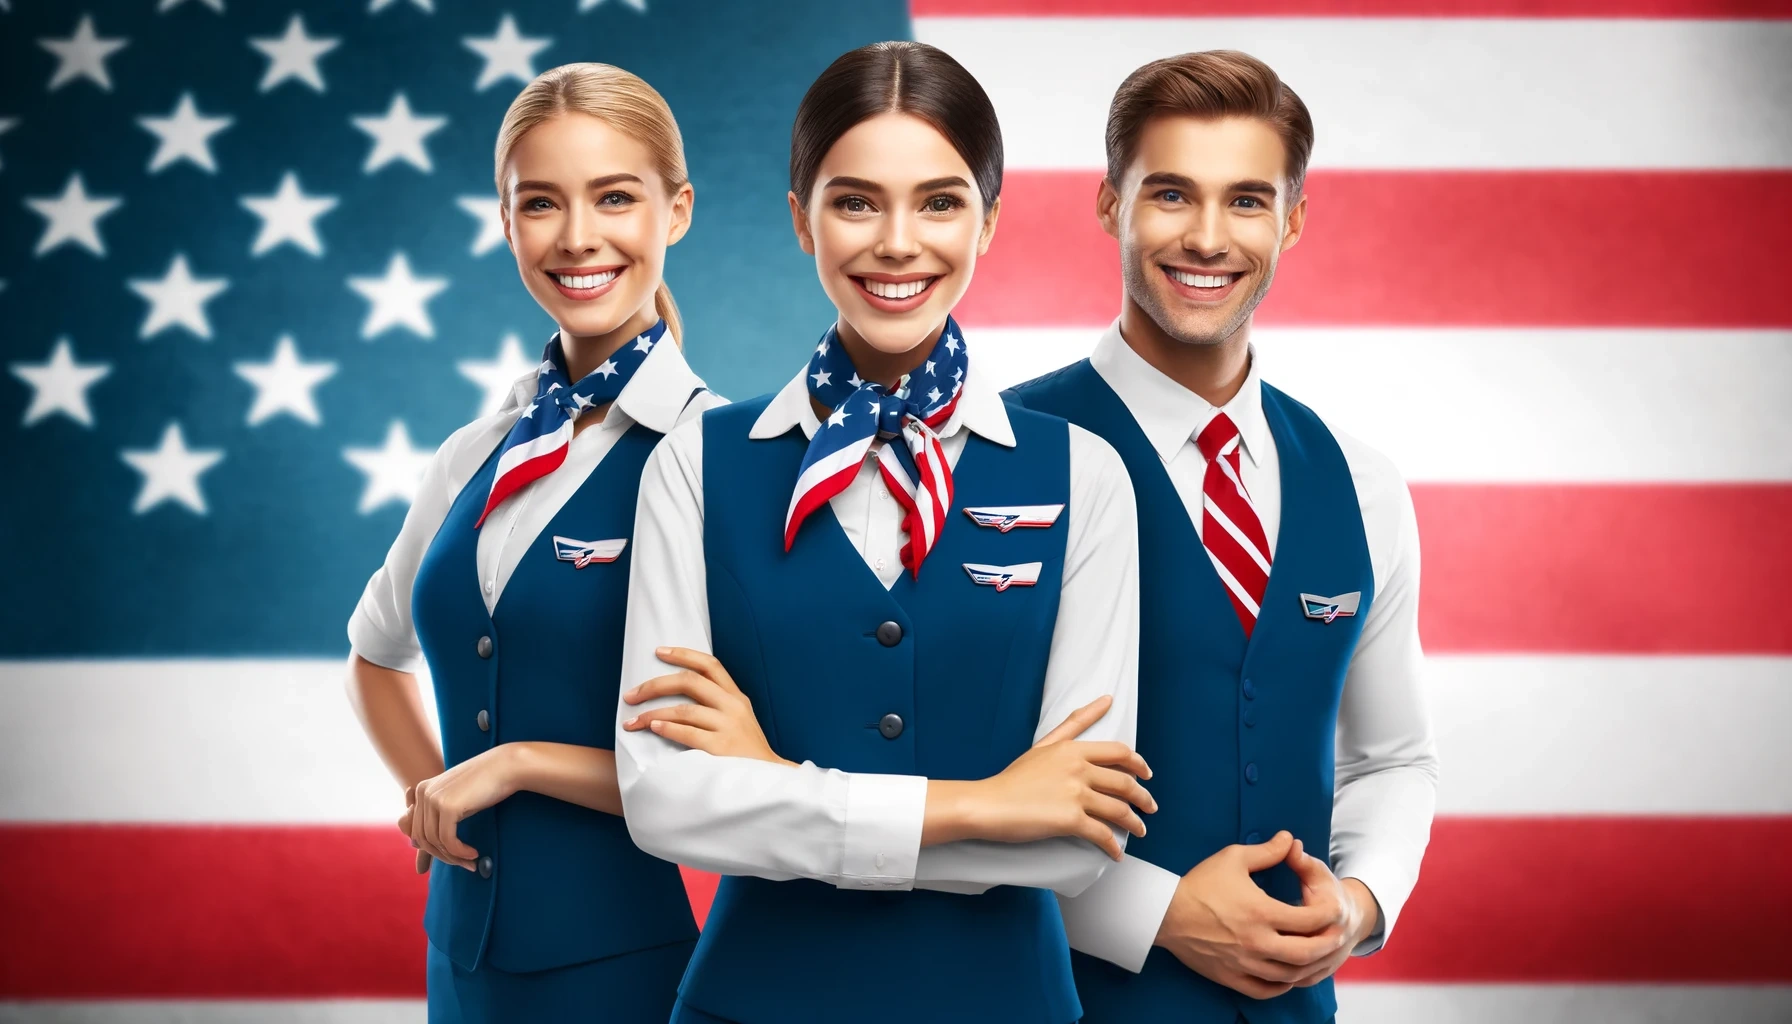 American Airlines Job Openings: Learn How to Easily Apply